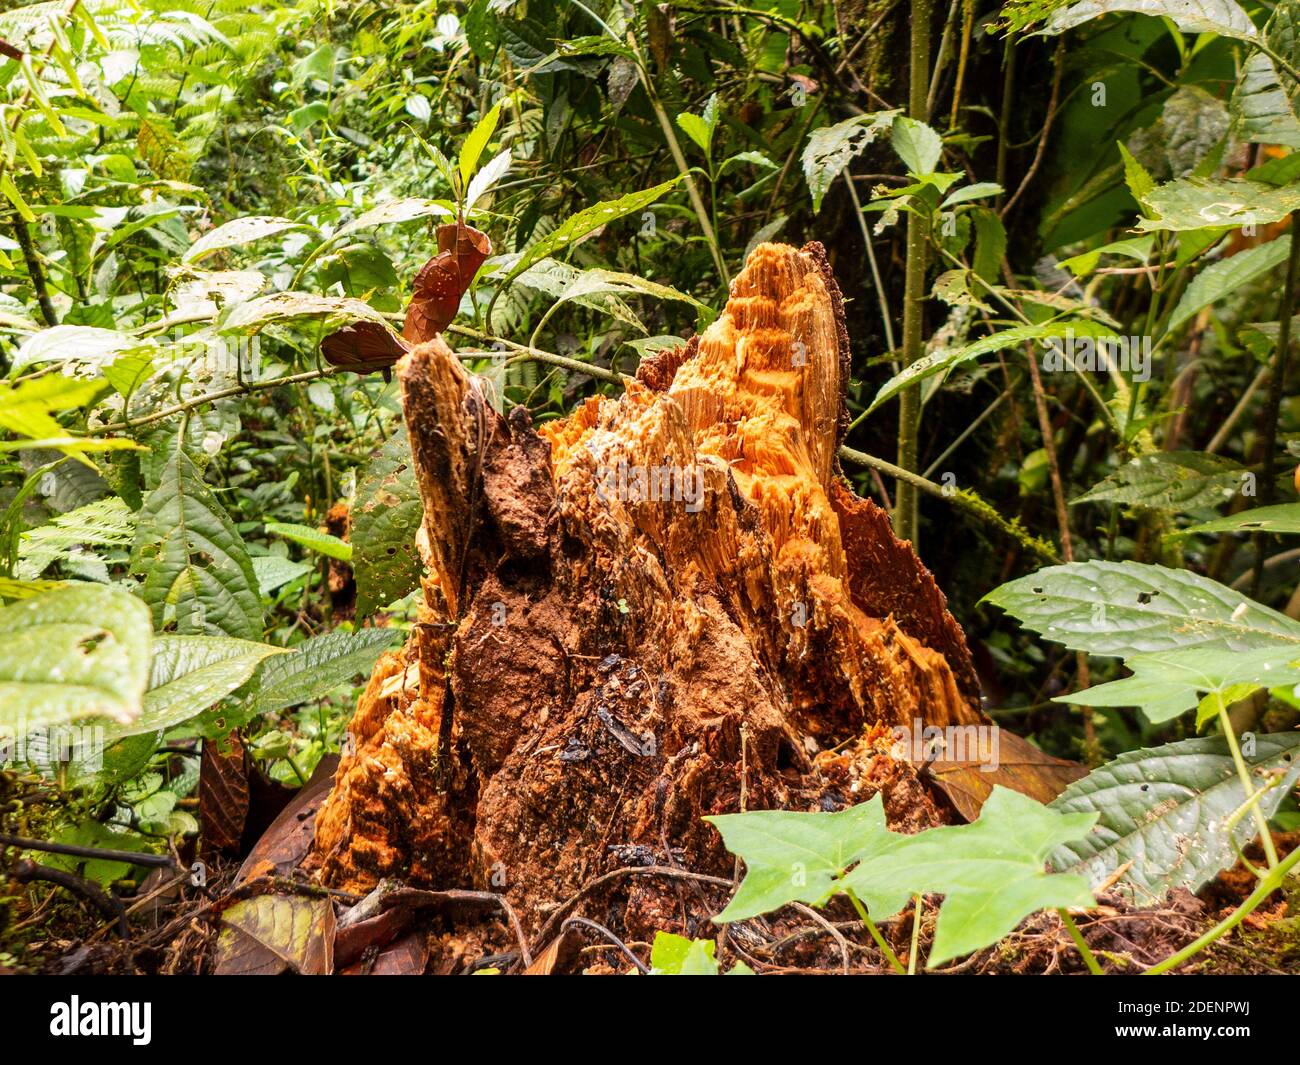 A tree stump rotted in the rainforest of Costa Rica Stock Photo